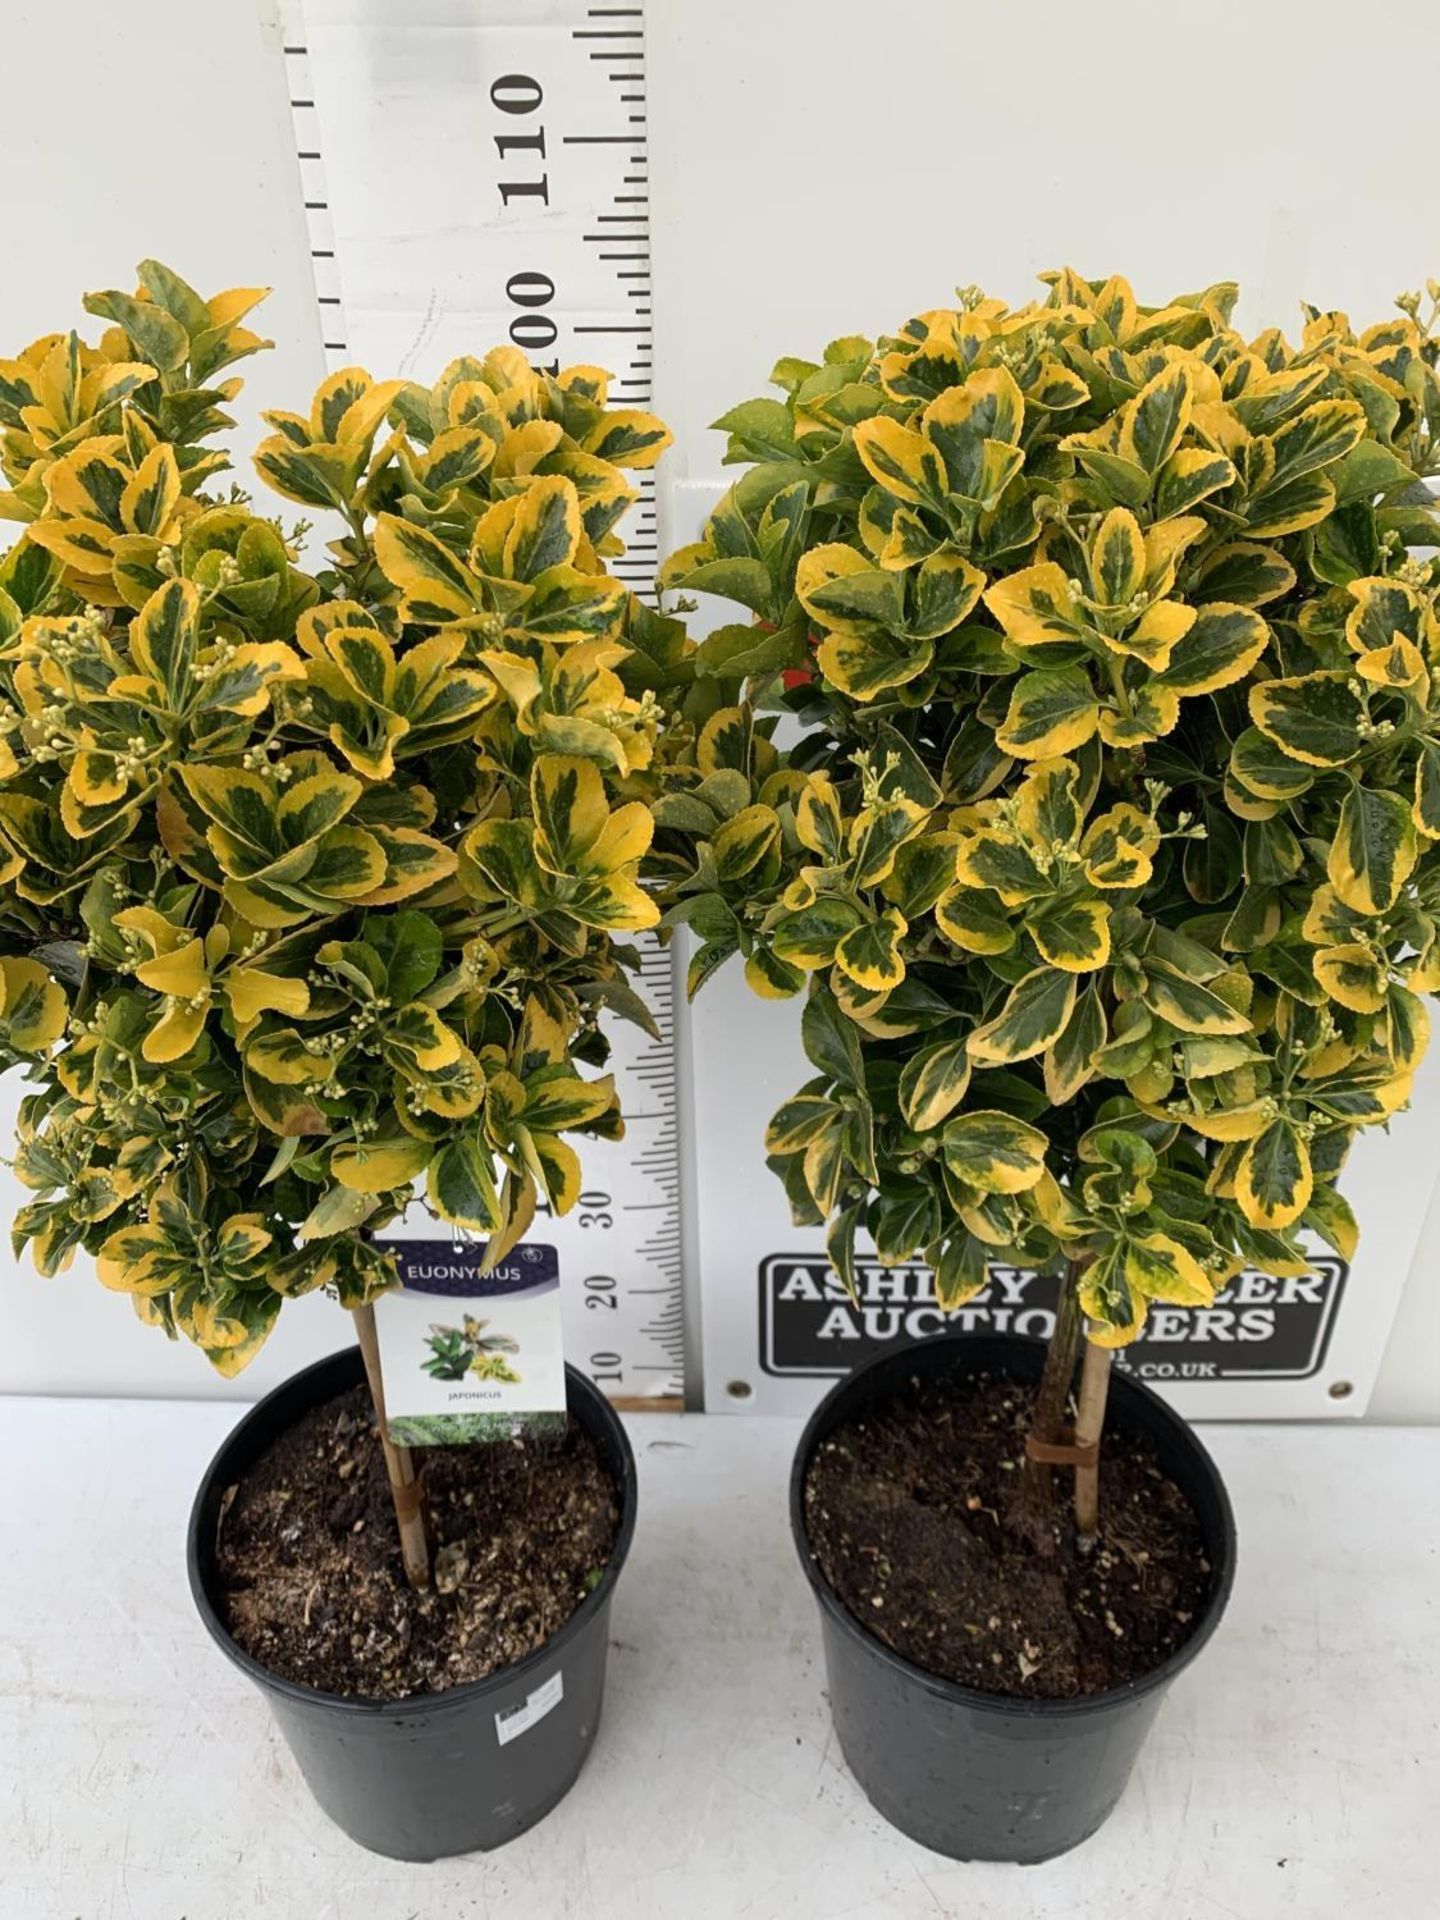 TWO EUONYMUS JAPONICUS STANDARD TREES APPROX 120CM IN HEIGHT IN 4 LTR POTS PLUS VAT TO BE SOLD FOR - Image 4 of 8